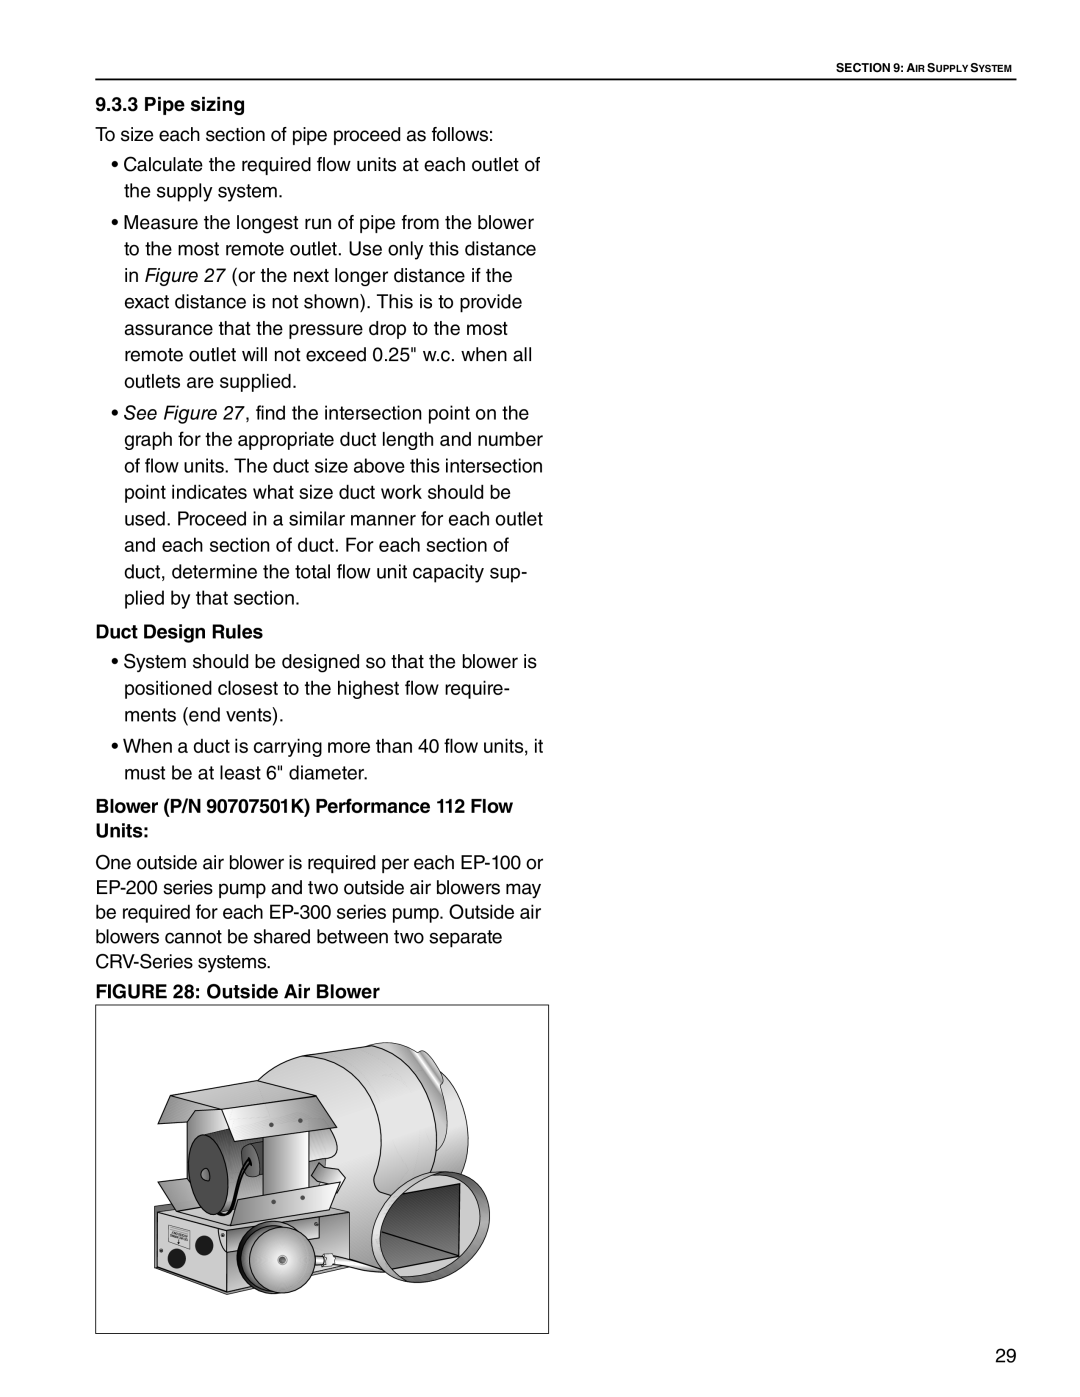 Roberts Gorden CRV-B-9 Pipe sizing, Duct Design Rules, Blower P/N 90707501K Performance 112 Flow Units, Outside Air Blower 